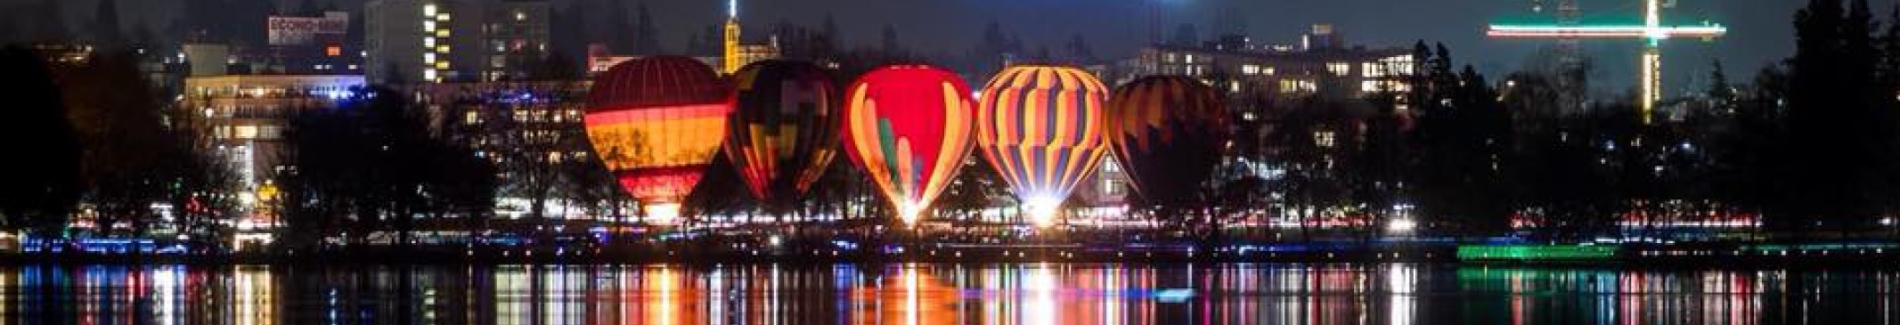 Hot air balloons resting near water at night lit up by city lights